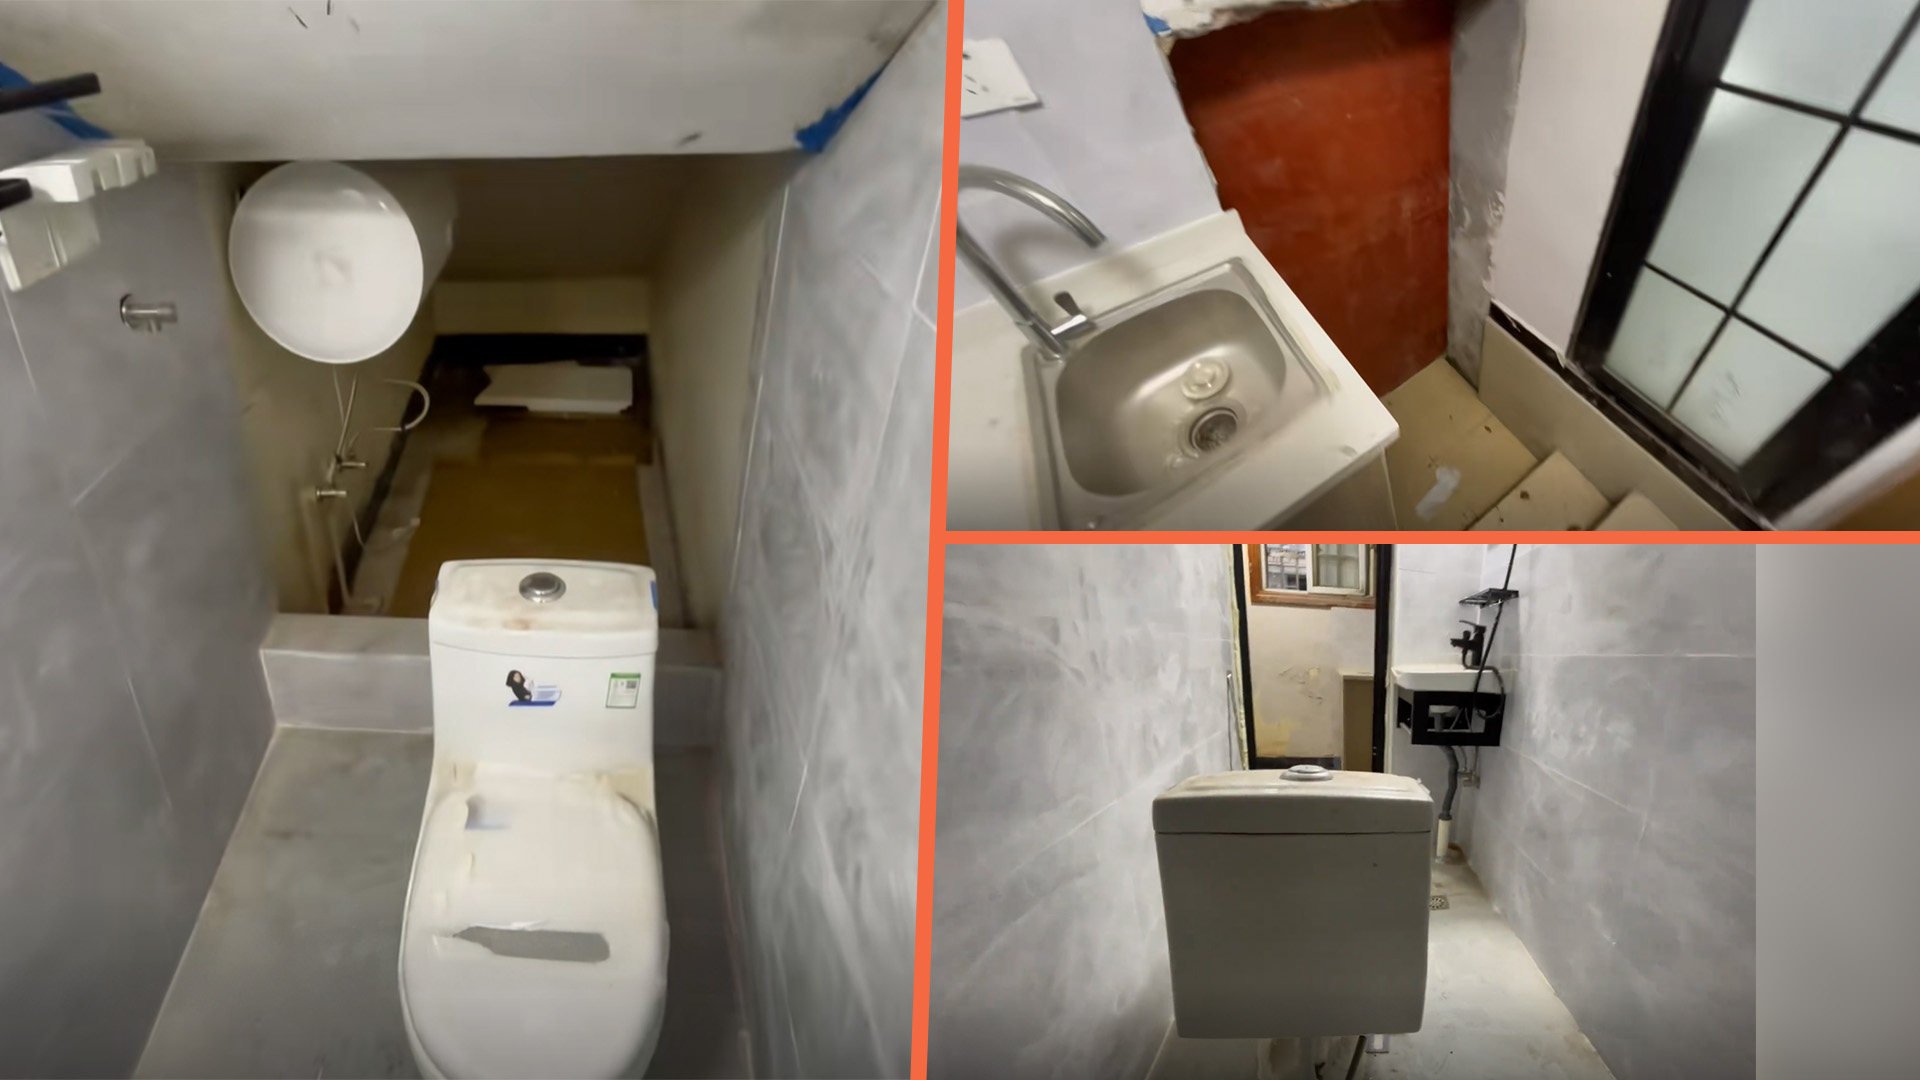 A tiny Shanghai flat with a bed behind toilet has been snapped up within a day of going on the market for US$40 a month in rent. Photo: SCMP composite/Douyin